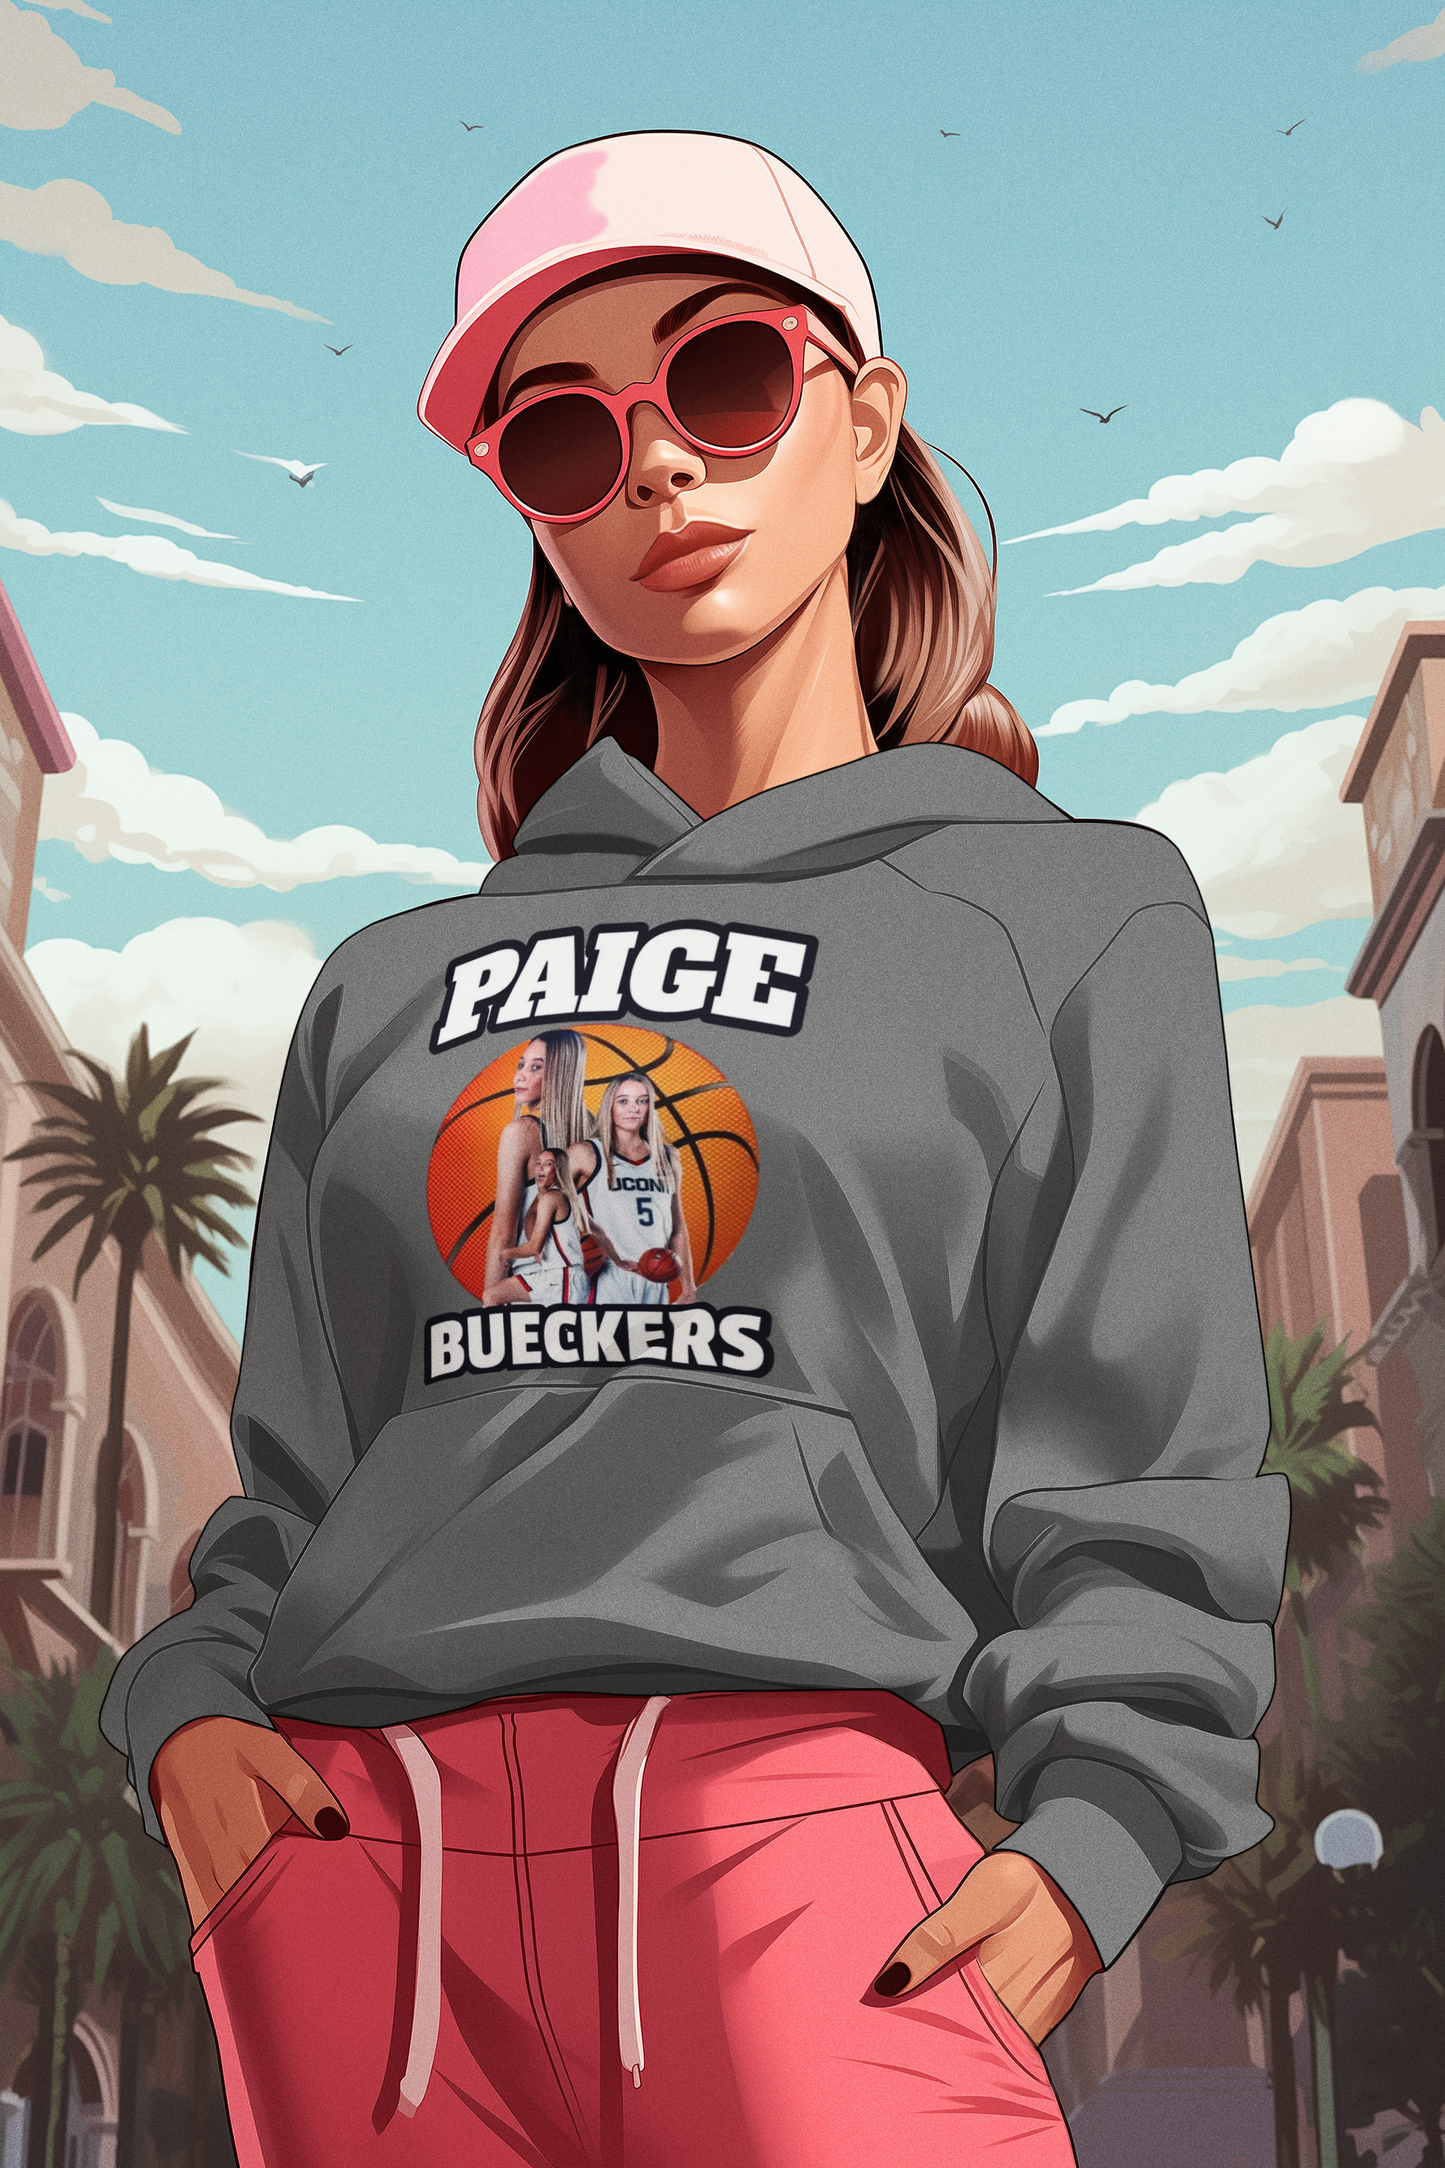 PAIGE "BUCKETS" BUECKERS